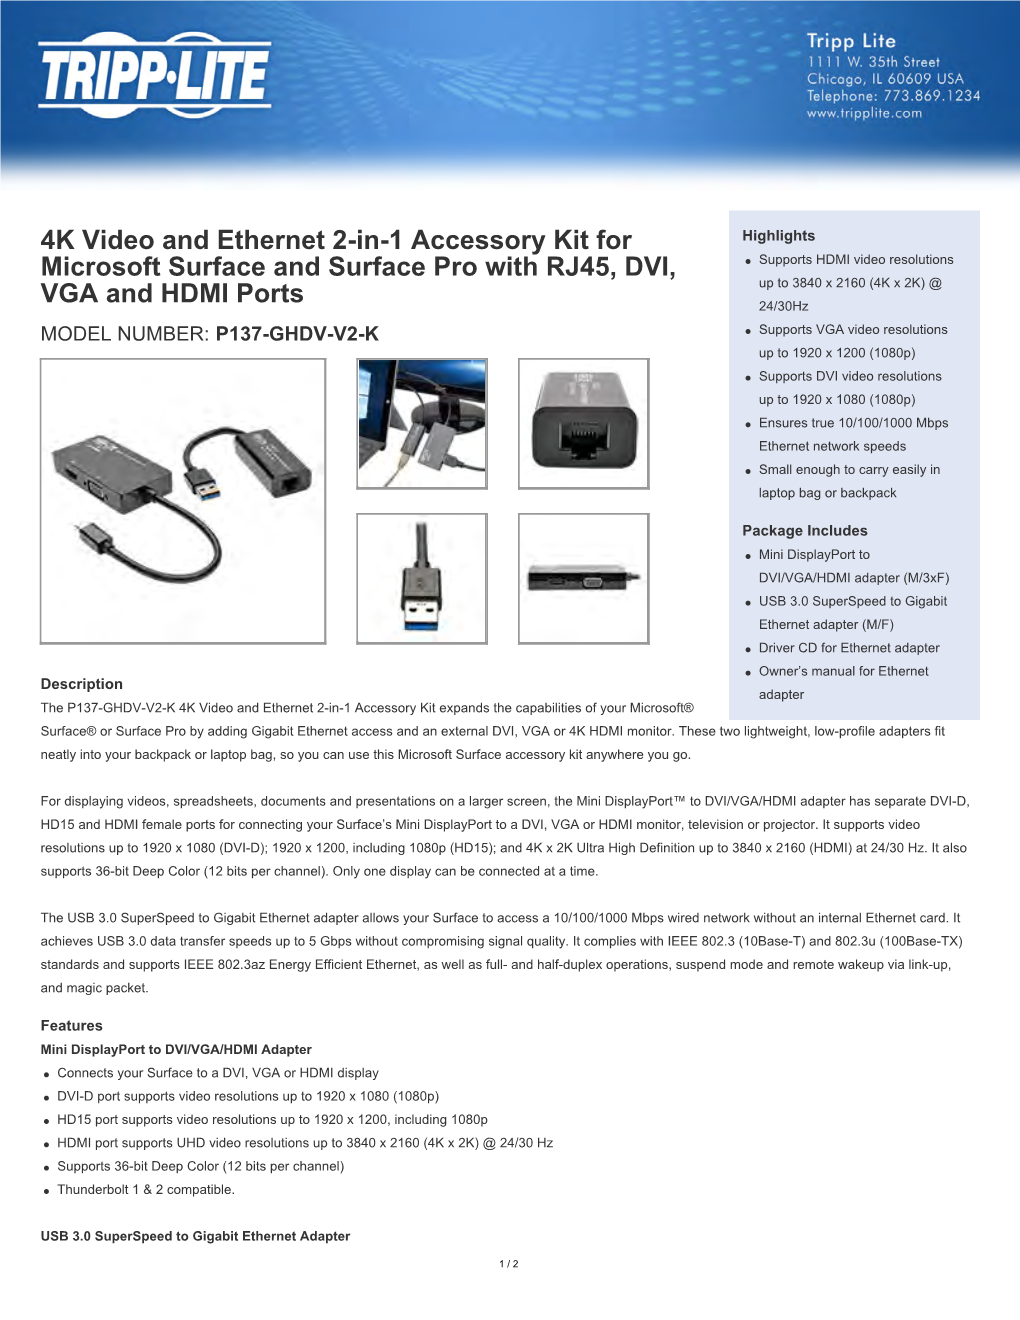 4K Video and Ethernet 2-In-1 Accessory Kit For